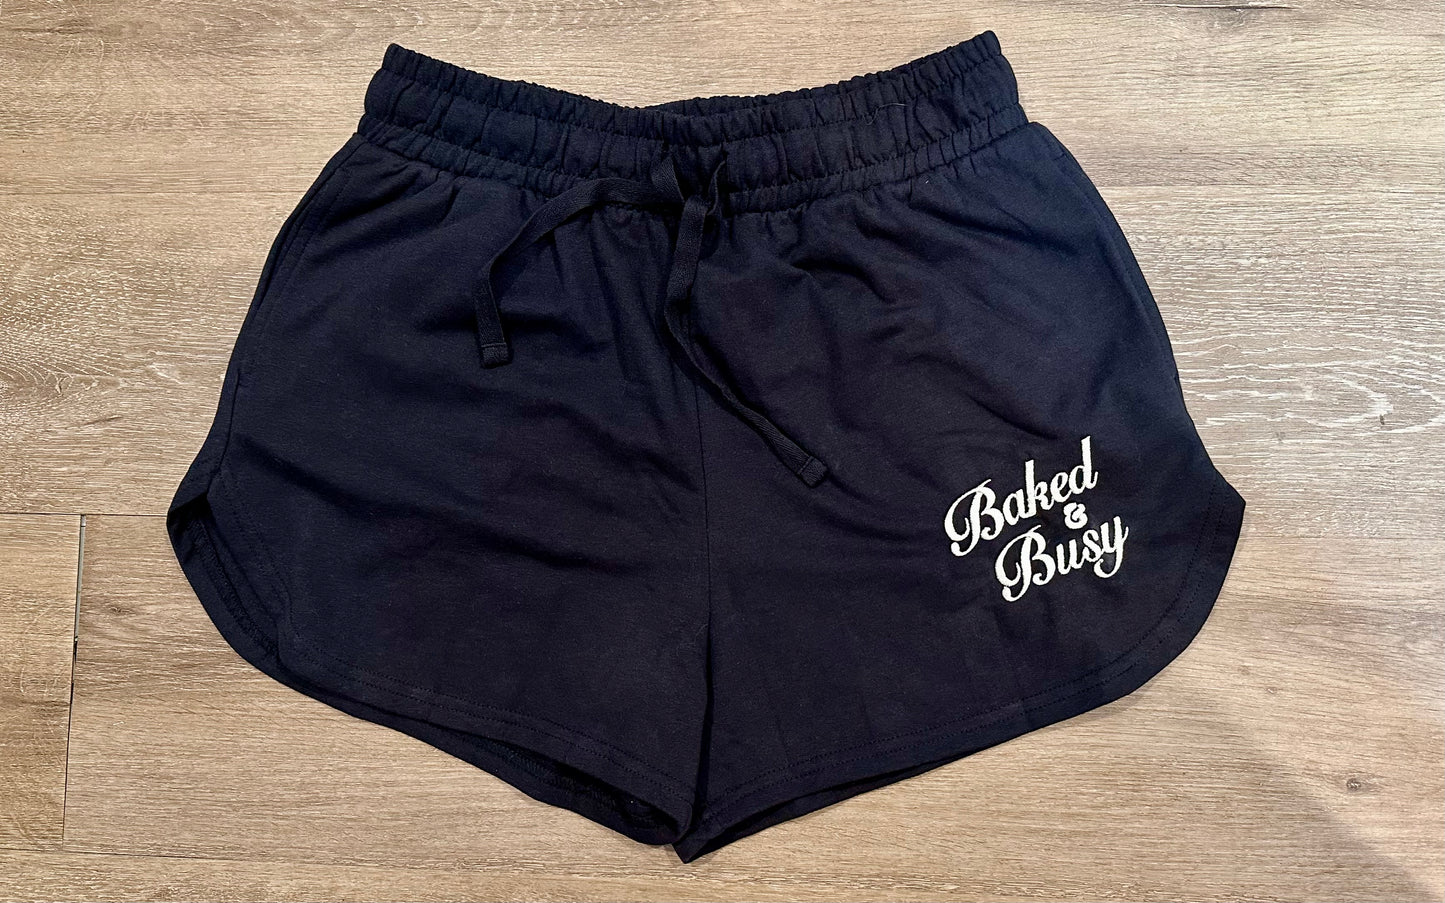 Baked&Busy Embroidered Women’s Shorts